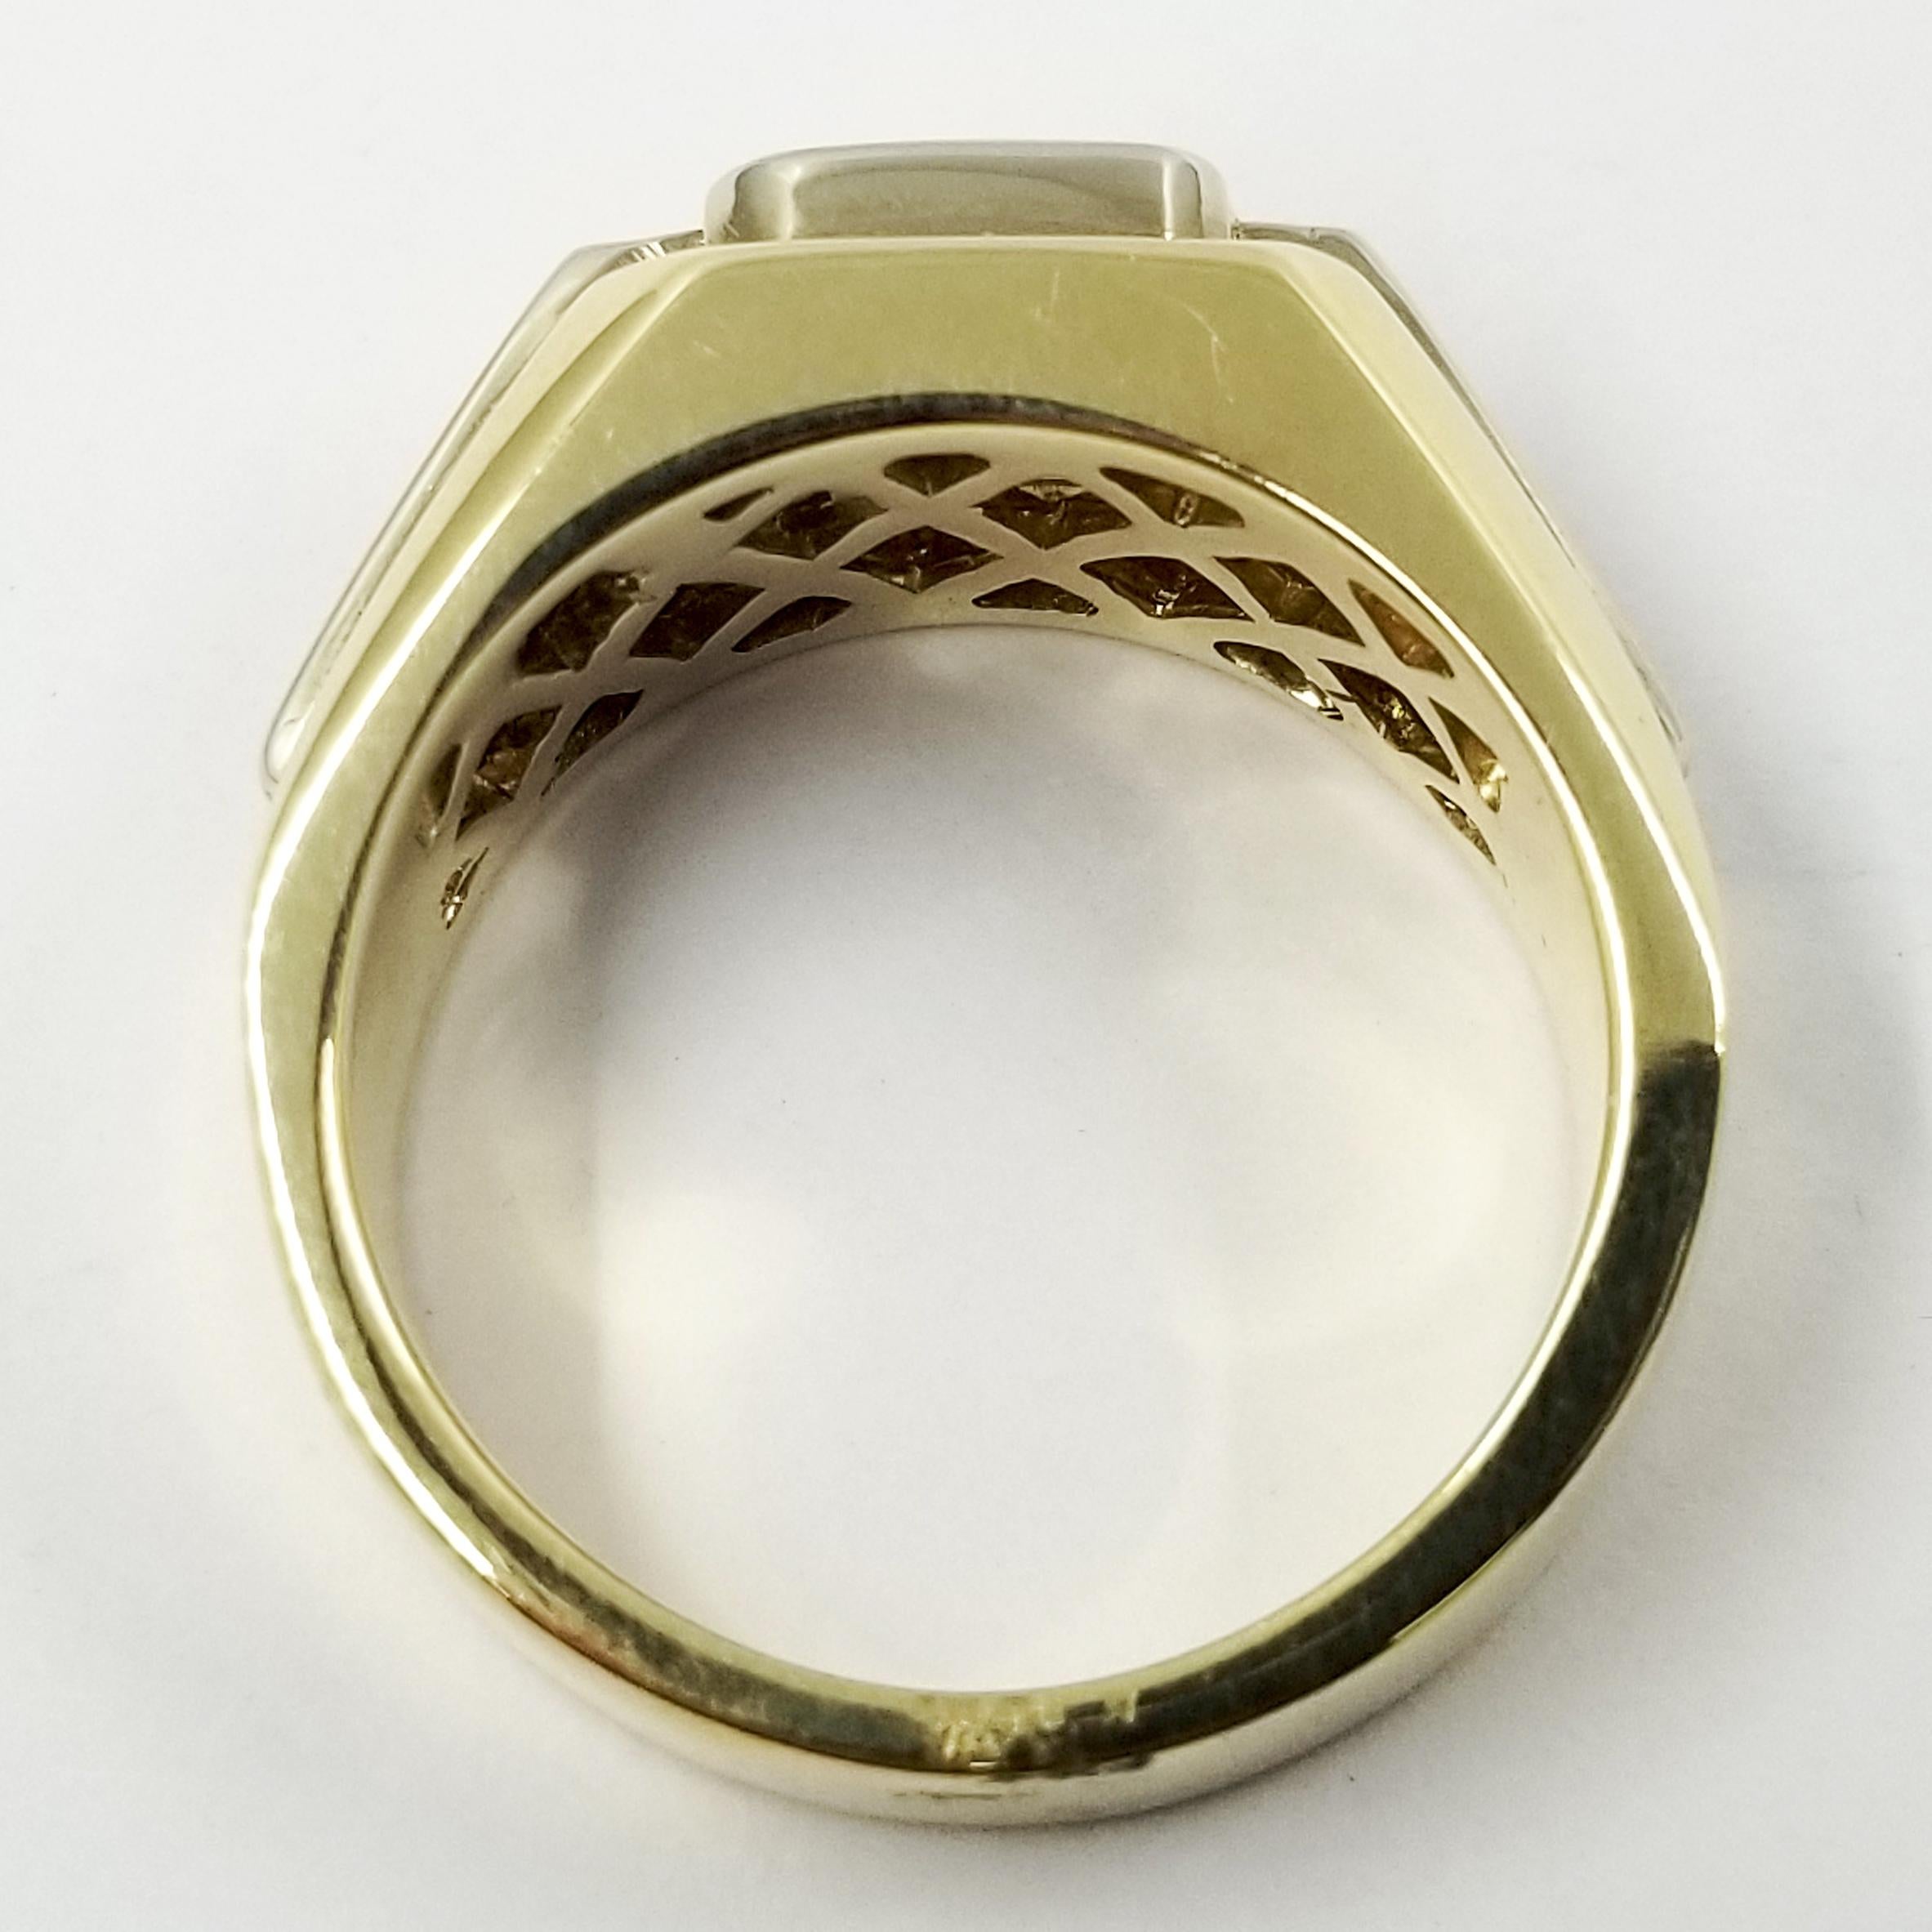 14 Karat Yellow and White Gold Men's Ring Featuring A 0.50 Carat Round Brilliant Cut Diamond Graded As SI Clarity & J Color. Finished Weight Is 21.2 Grams. Current Finger Size 11; Purchase Includes Free Sizing.